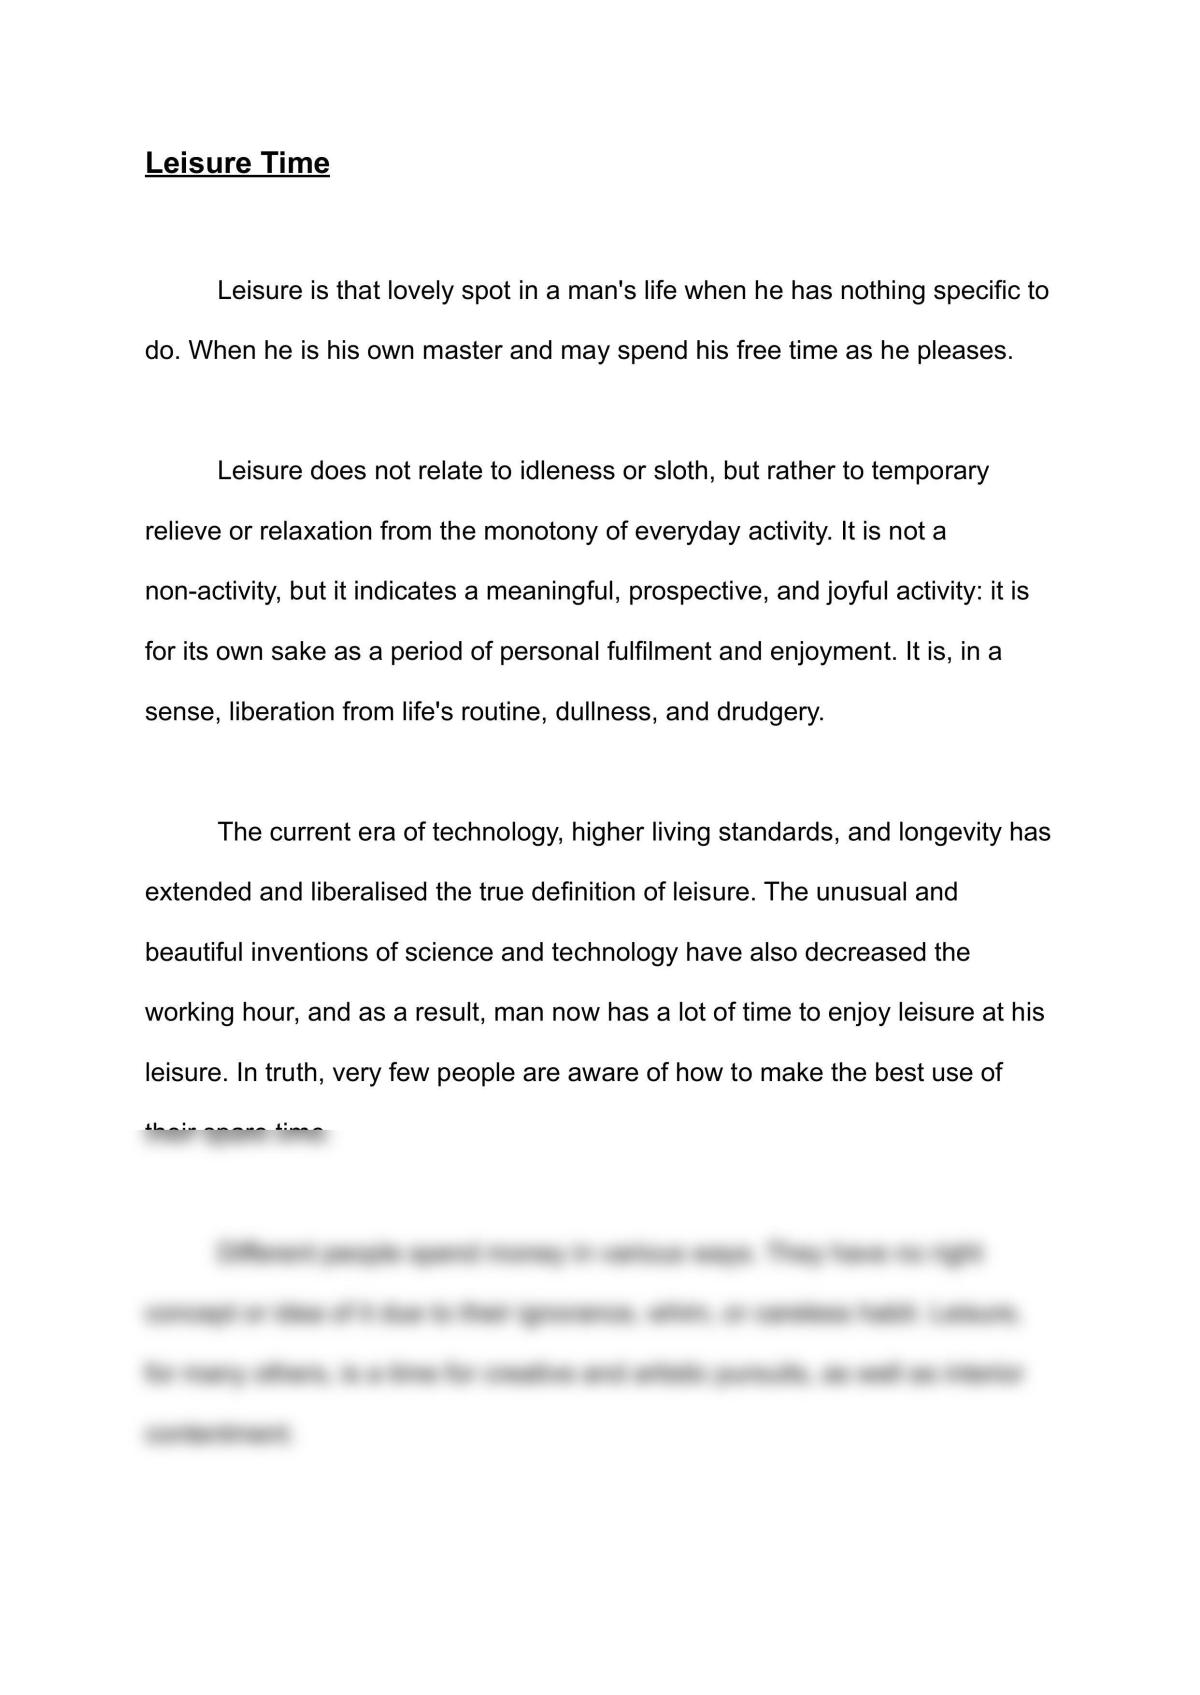 spend leisure time essay